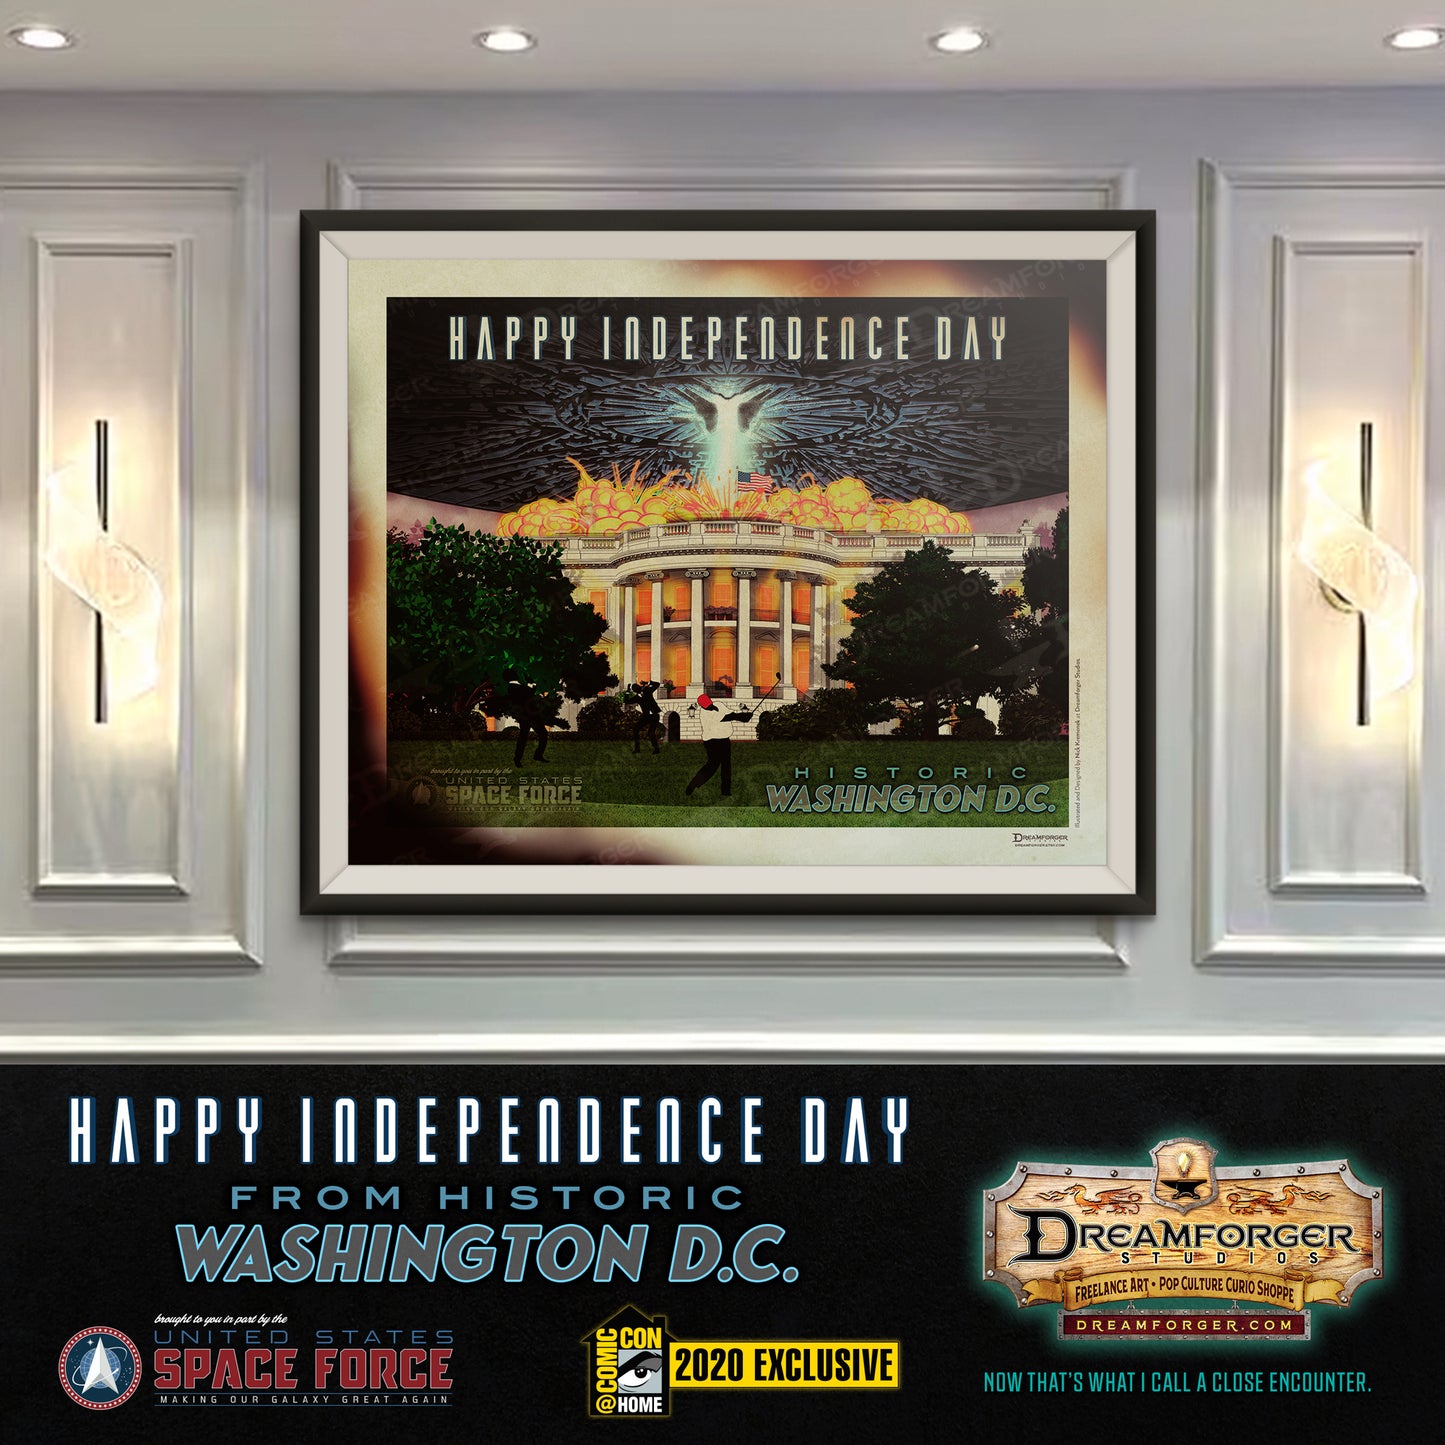 "Happy Independence Day from Historic Washington D.C." Art Print (SDCC@Home 2020 Exclusive)